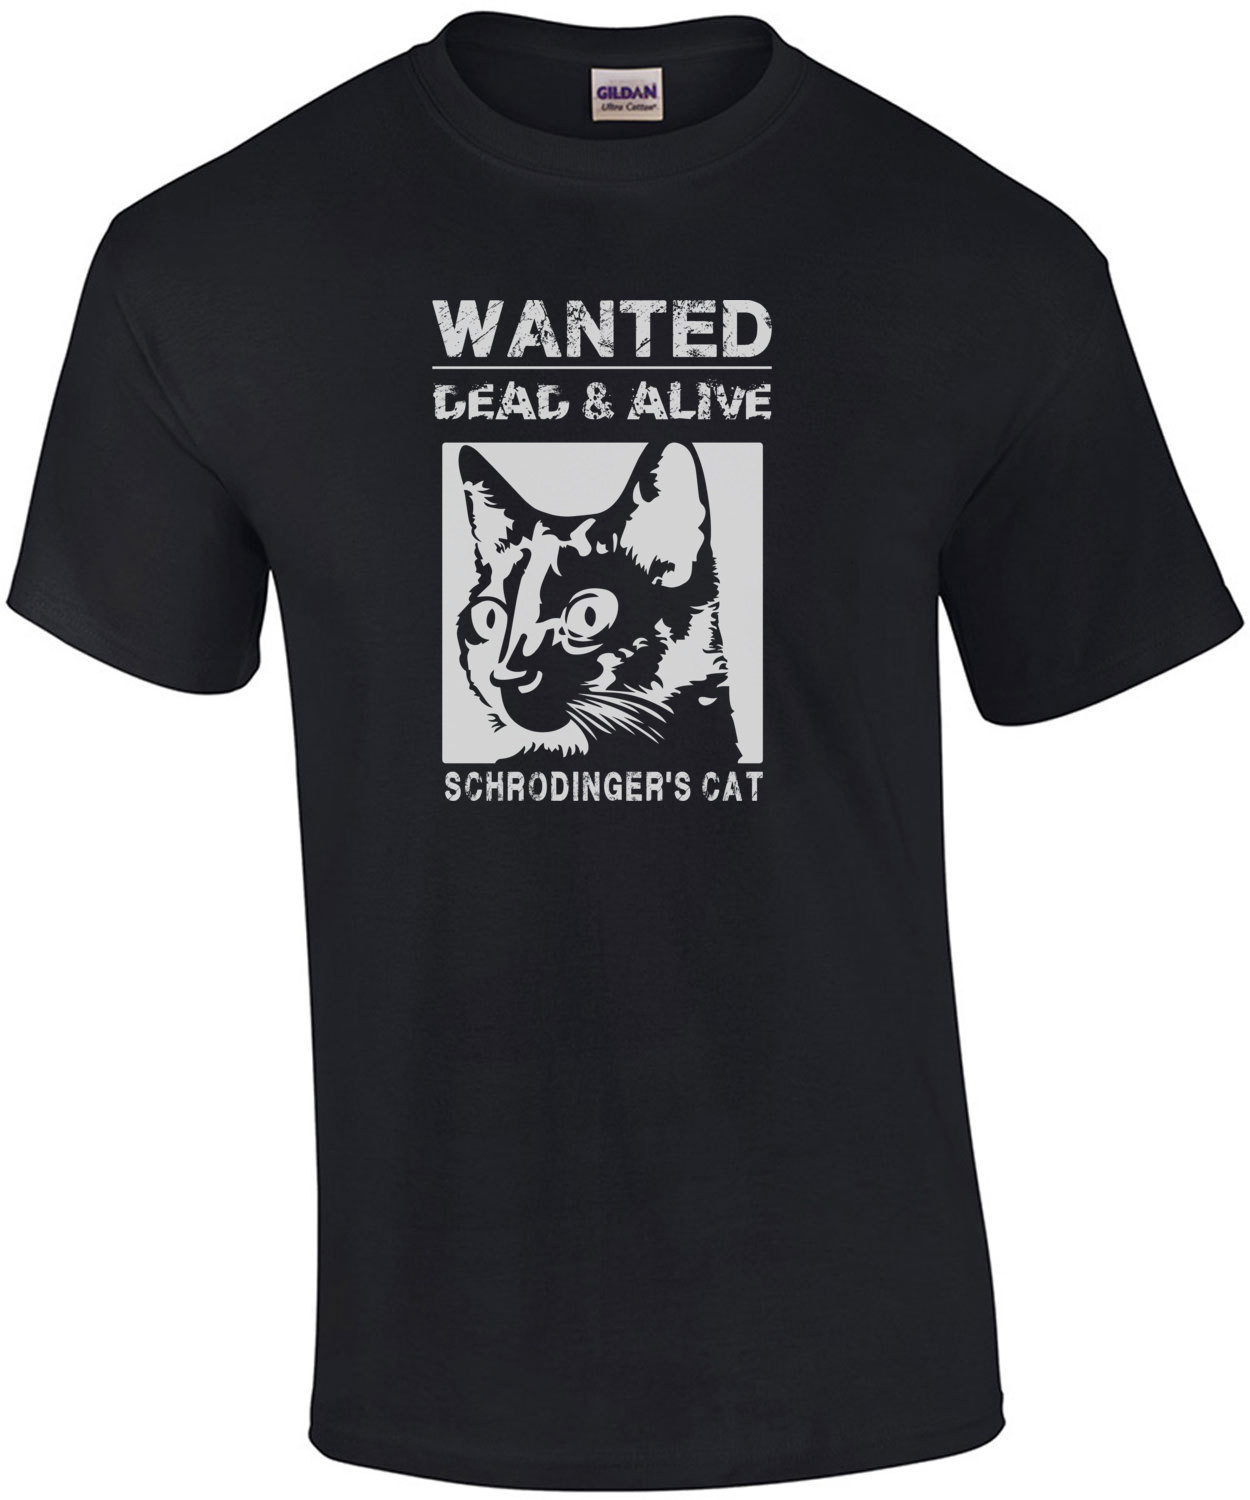 Schrodingers Cat - Wanted dead and alive - Funny